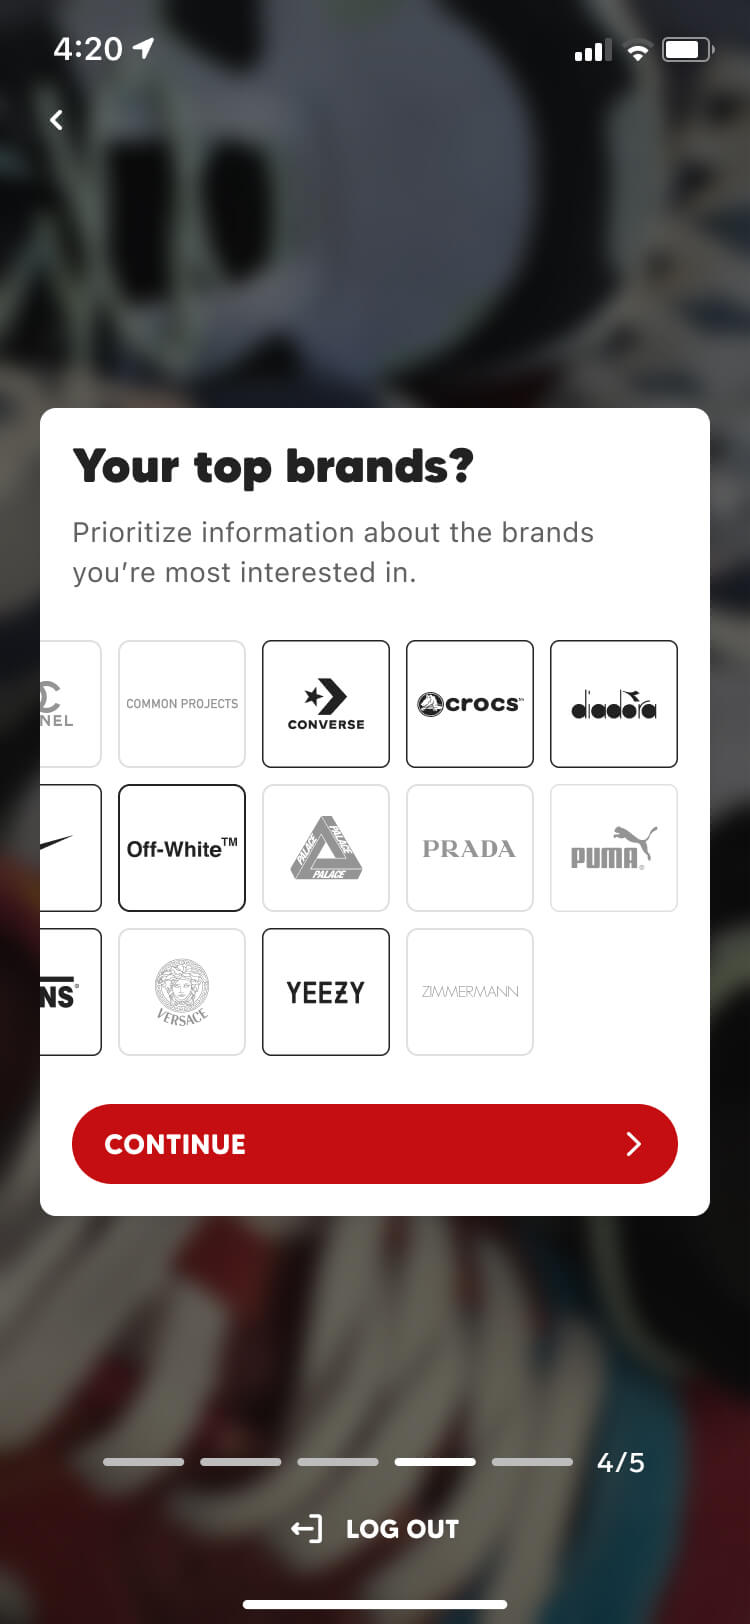 Your top brands screenshot of the Collect mobile app